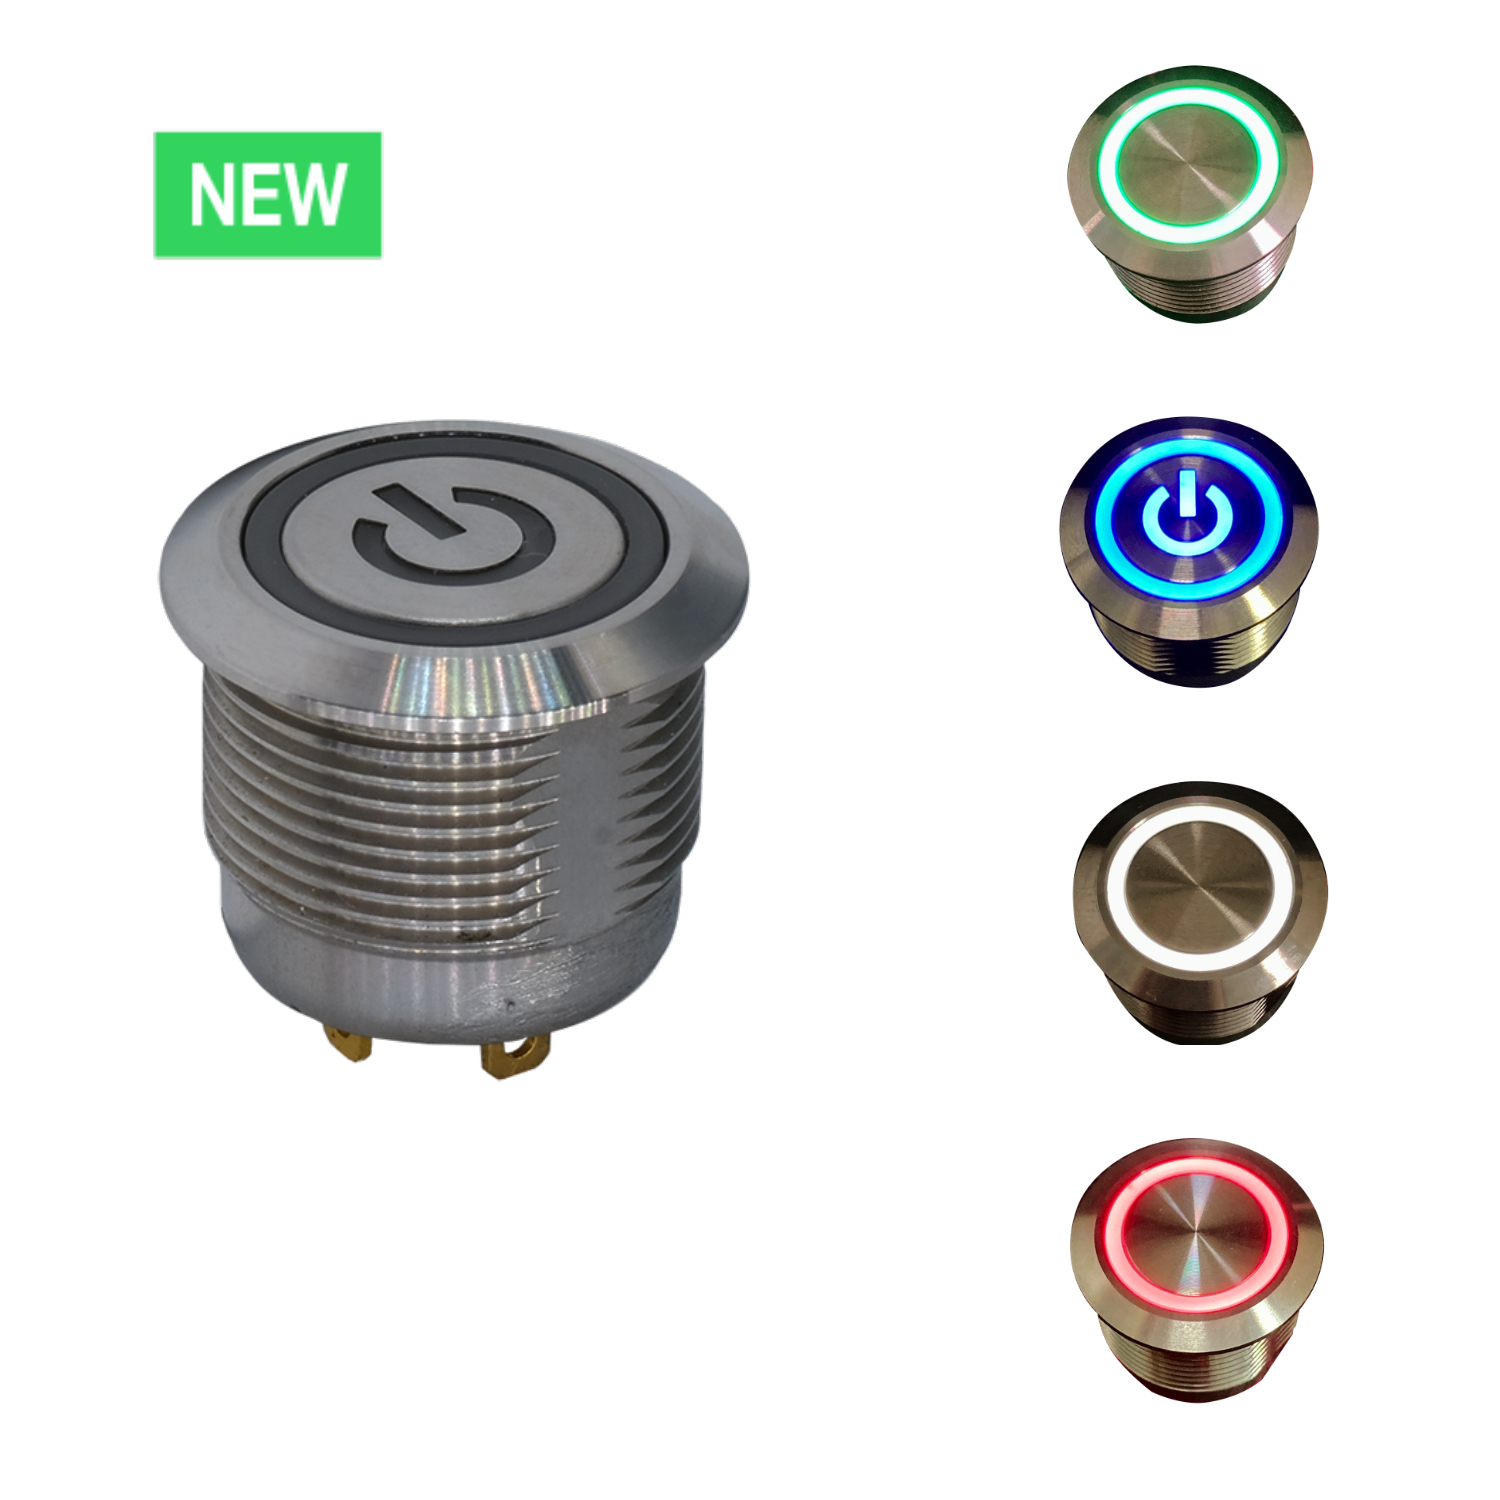 Anti-vandal Pushbutton Features up to 40% Space-Savings